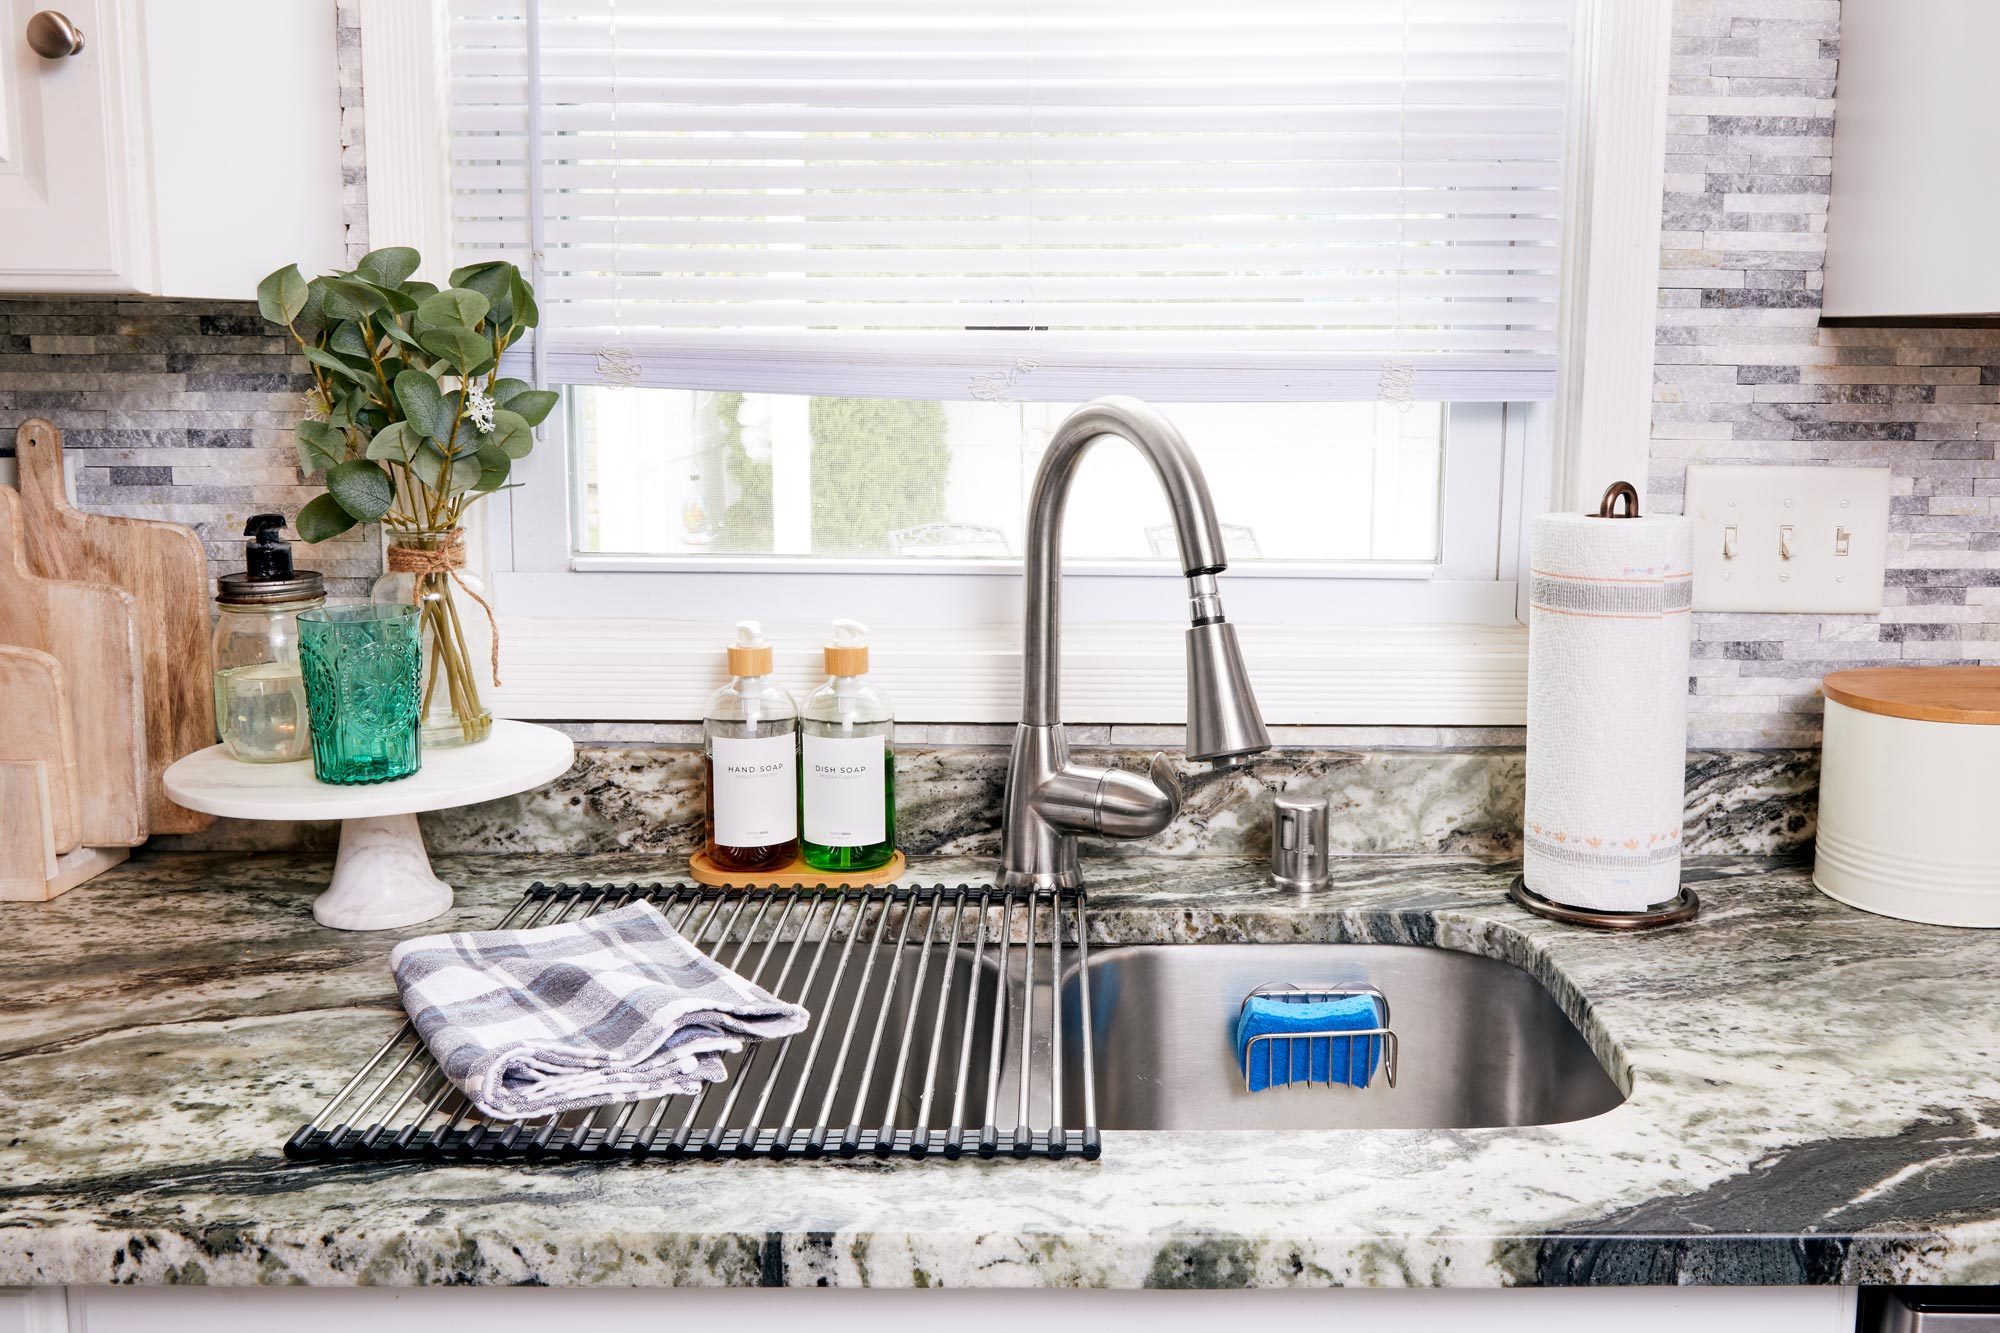 How to Organize a Kitchen Sink So You Can Find Anything in Seconds